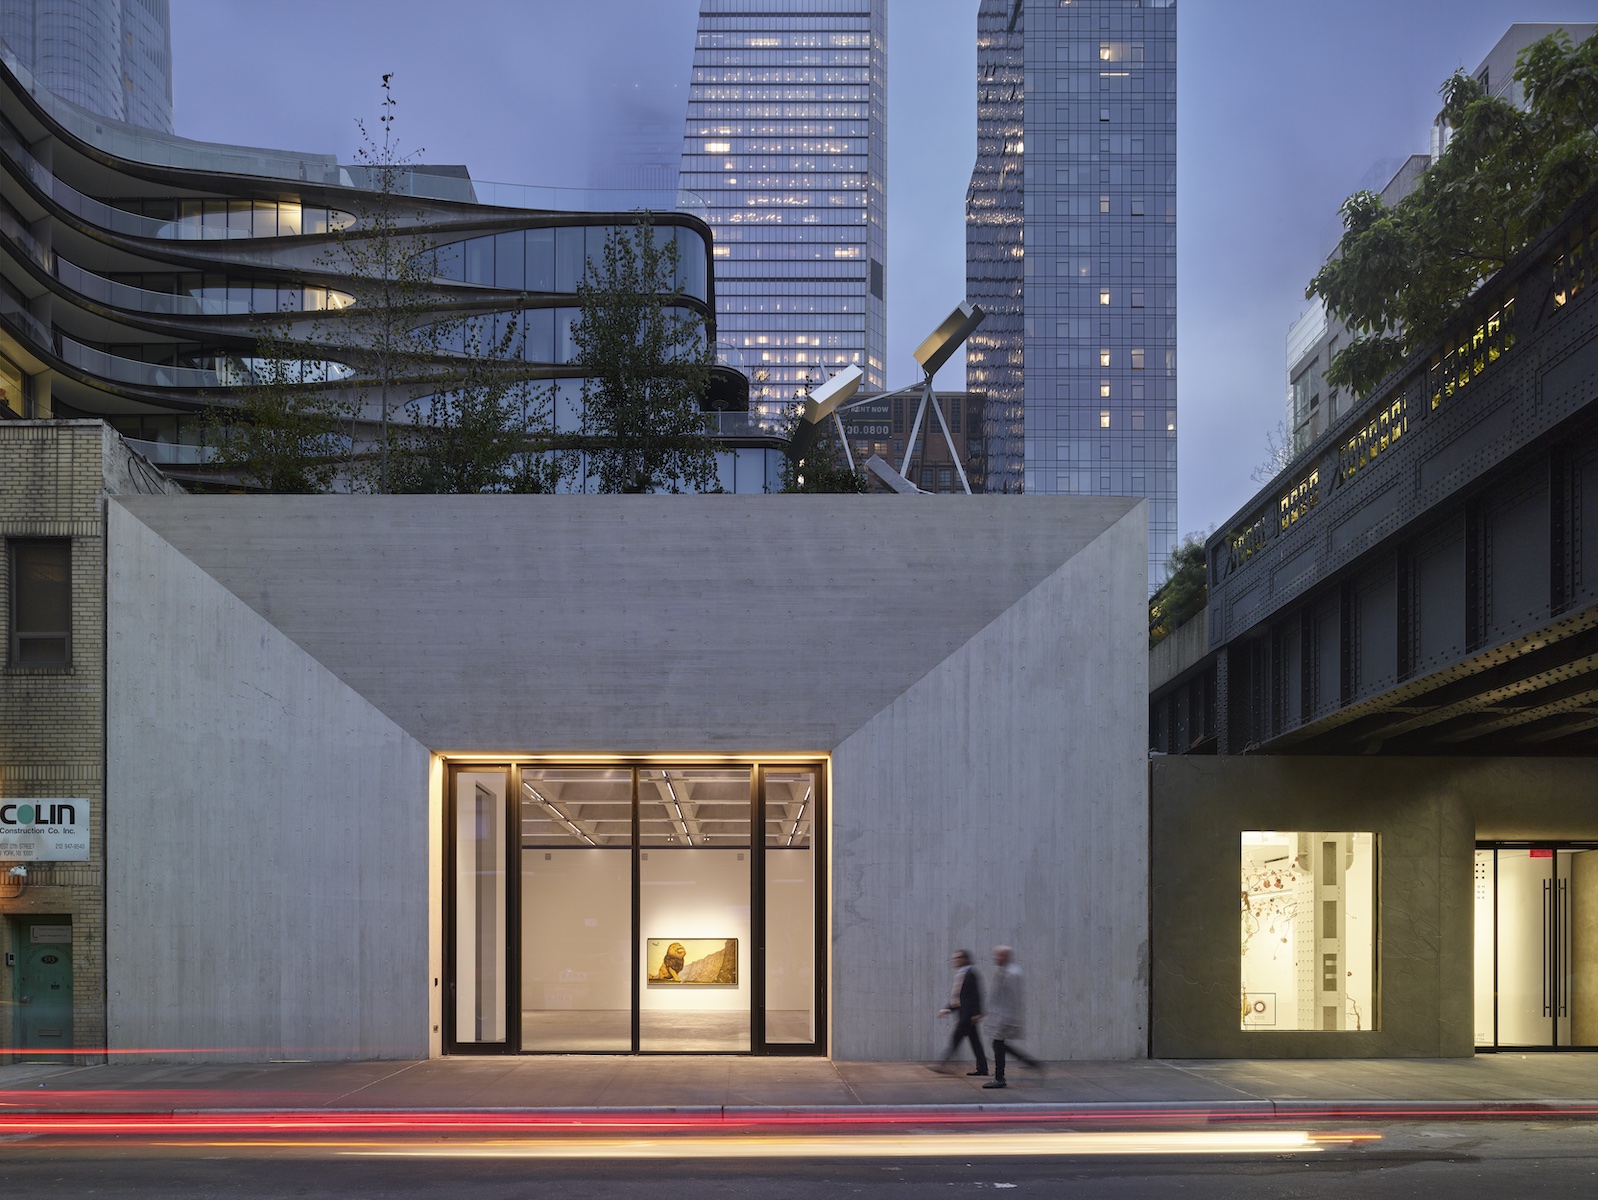 Exterior image of the Kasmin Gallery in New York